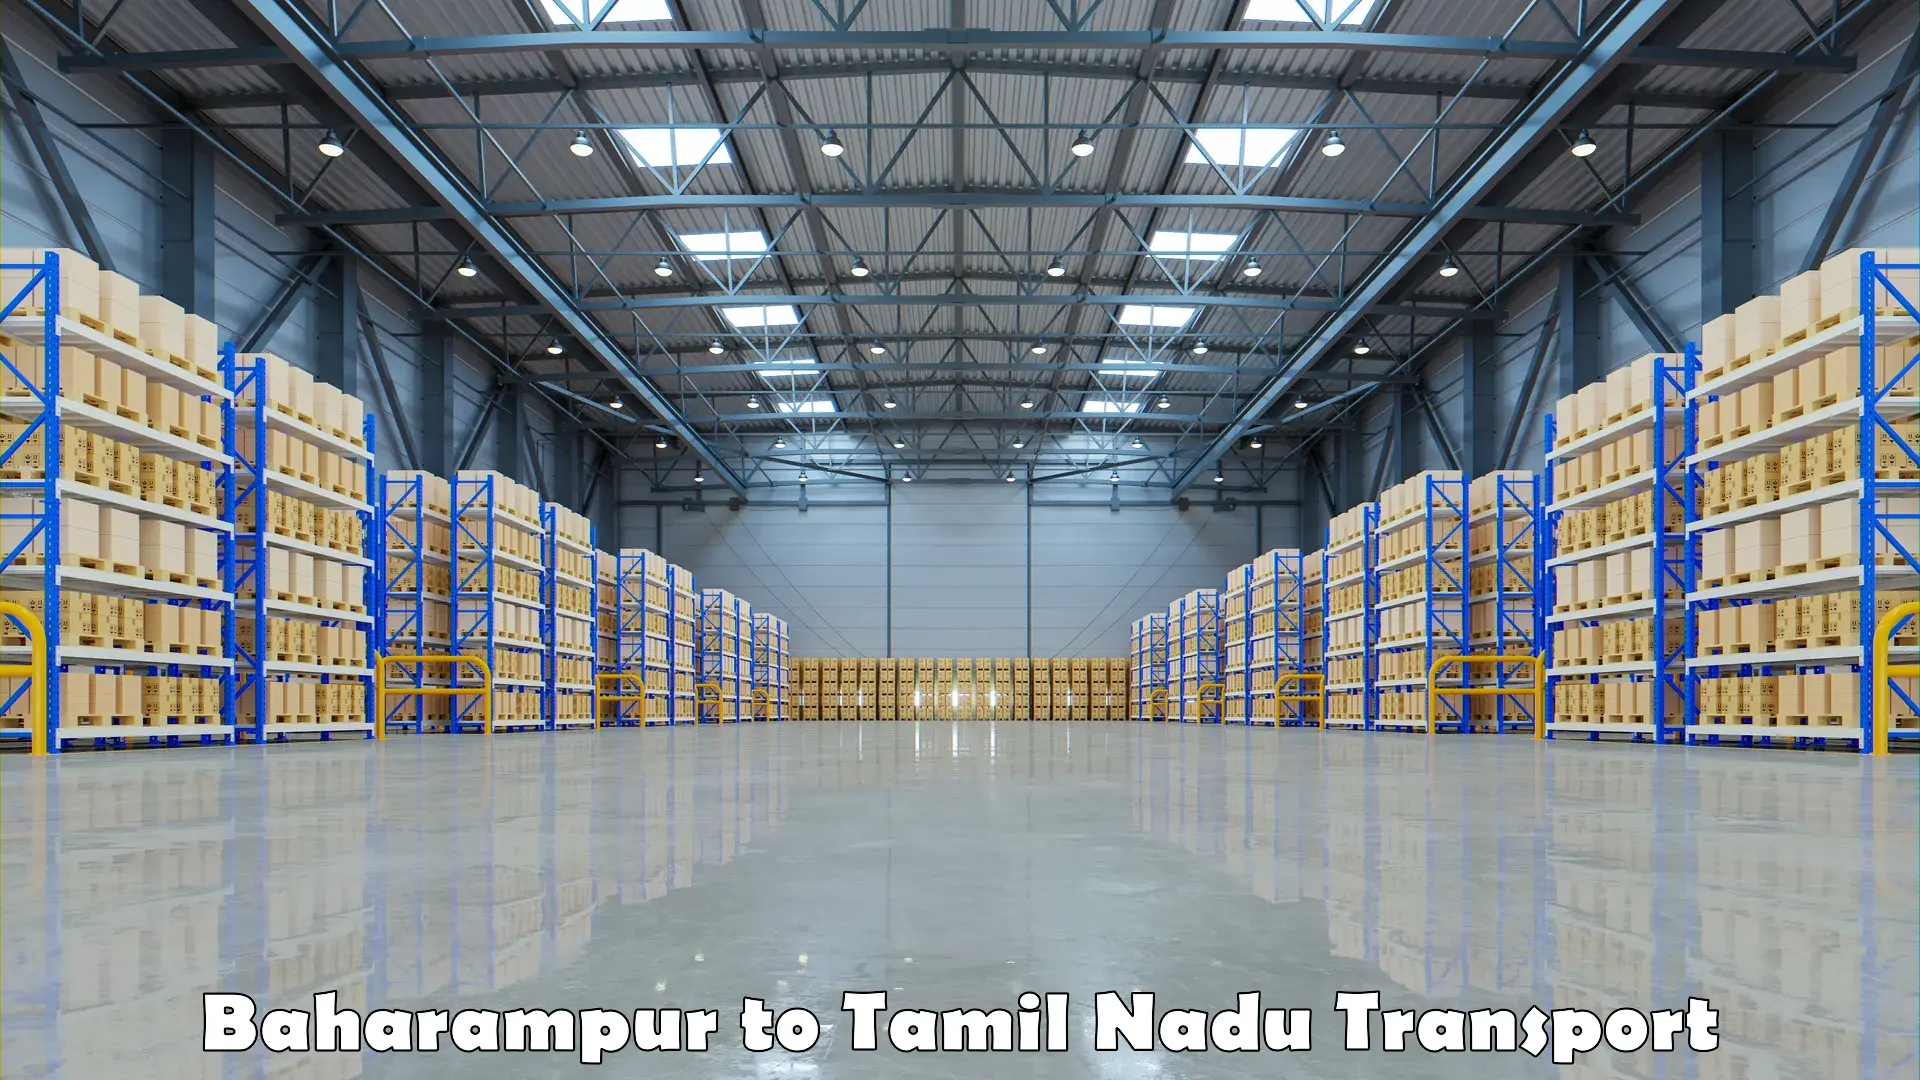 Online transport service Baharampur to Coimbatore